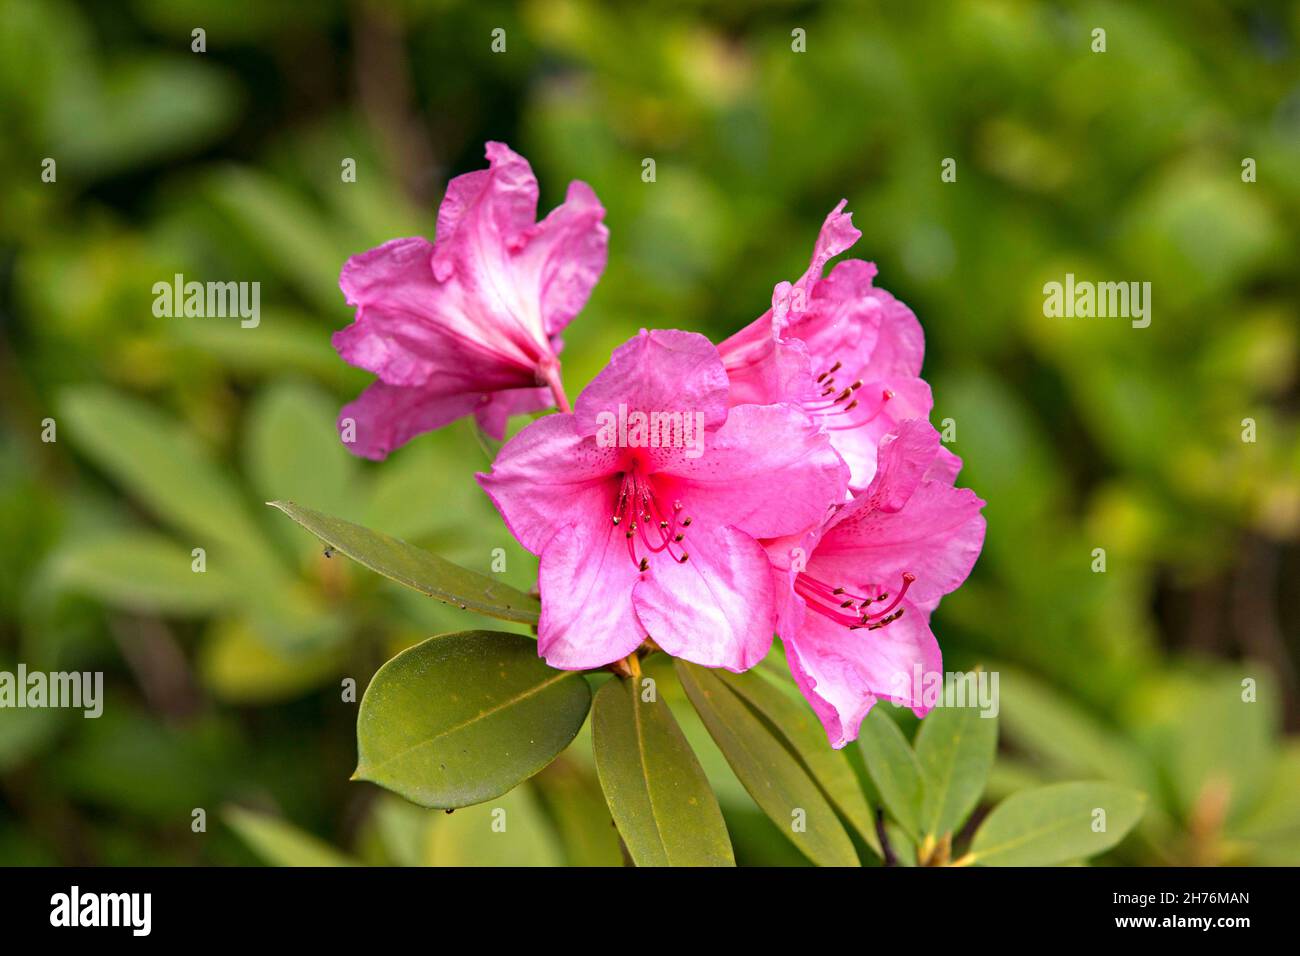 Rhododendron Flowers  (  Rhododendron sp. ), Chiemsee Chiemgau, Upper Bavaria Germany Europe Stock Photo